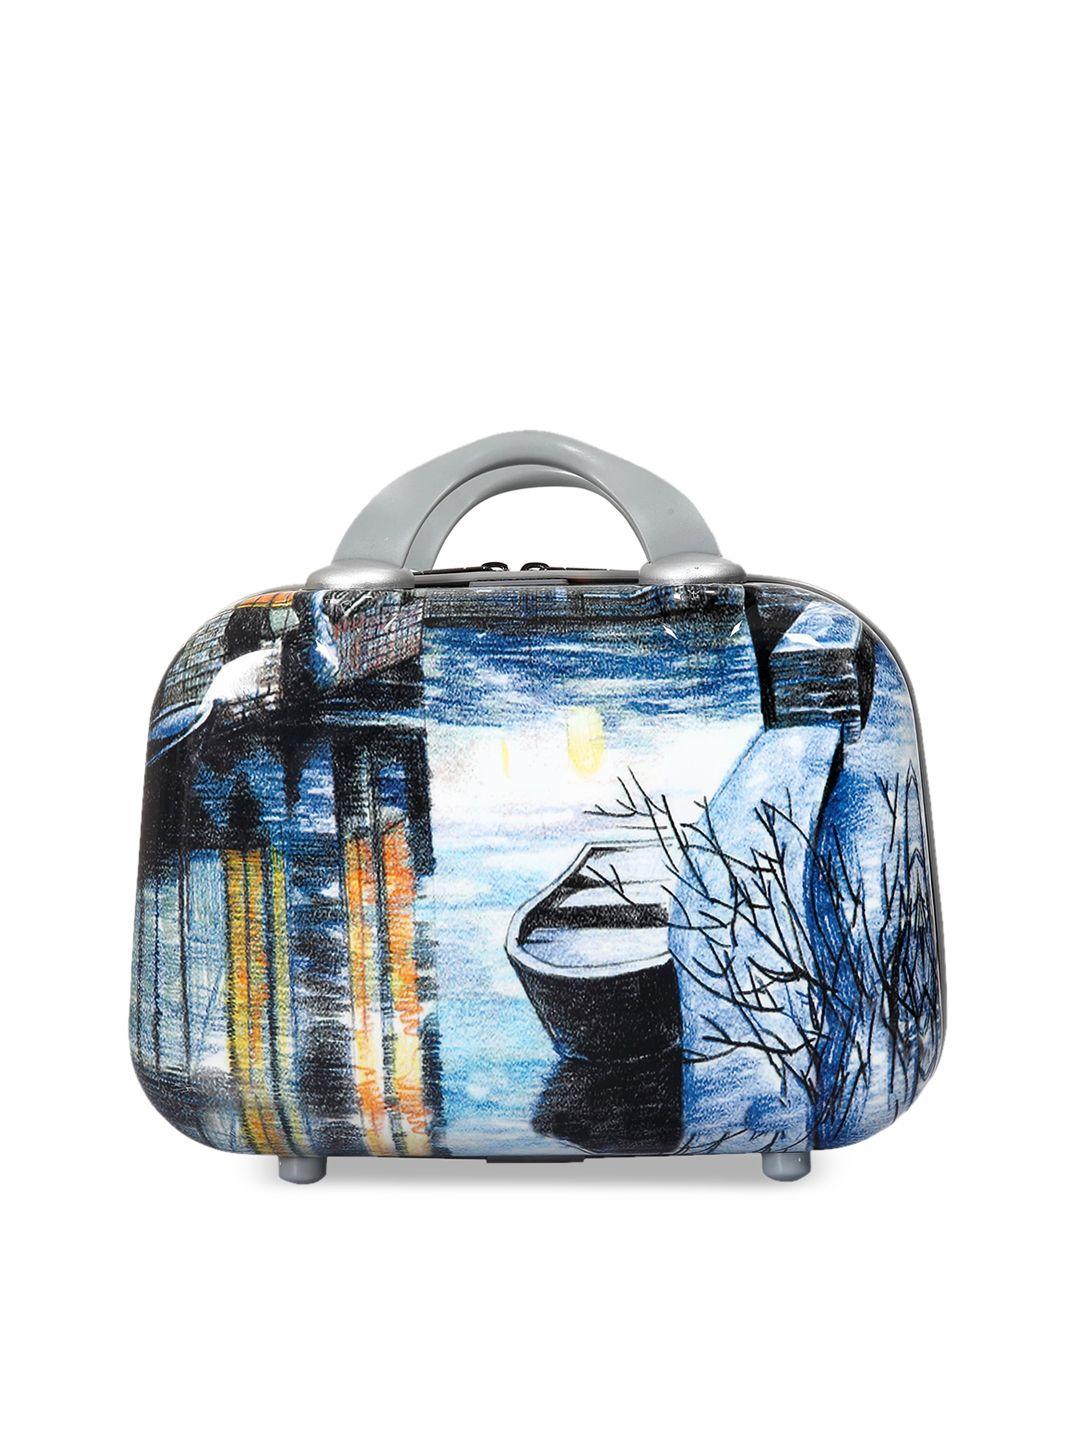 polo class blue & white printed hard-sided vanity bag